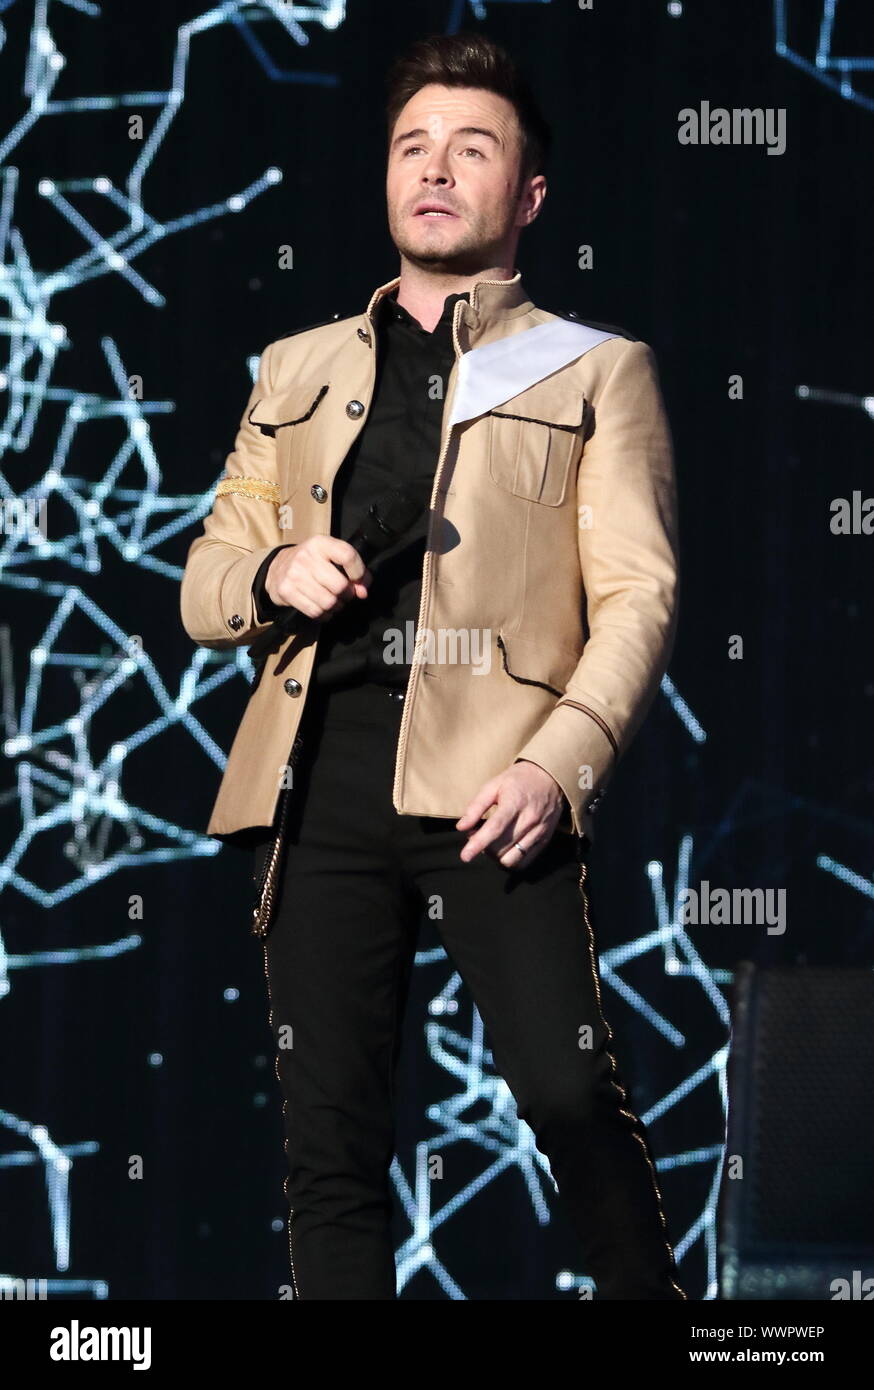 London, UK. 15th Sep, 2019. Shane Filan of an Irish Pop vocal group ( Westlife) performs live on stage at the BBC Radio 2 Live in Hyde Park,  London. Credit: SOPA Images Limited/Alamy